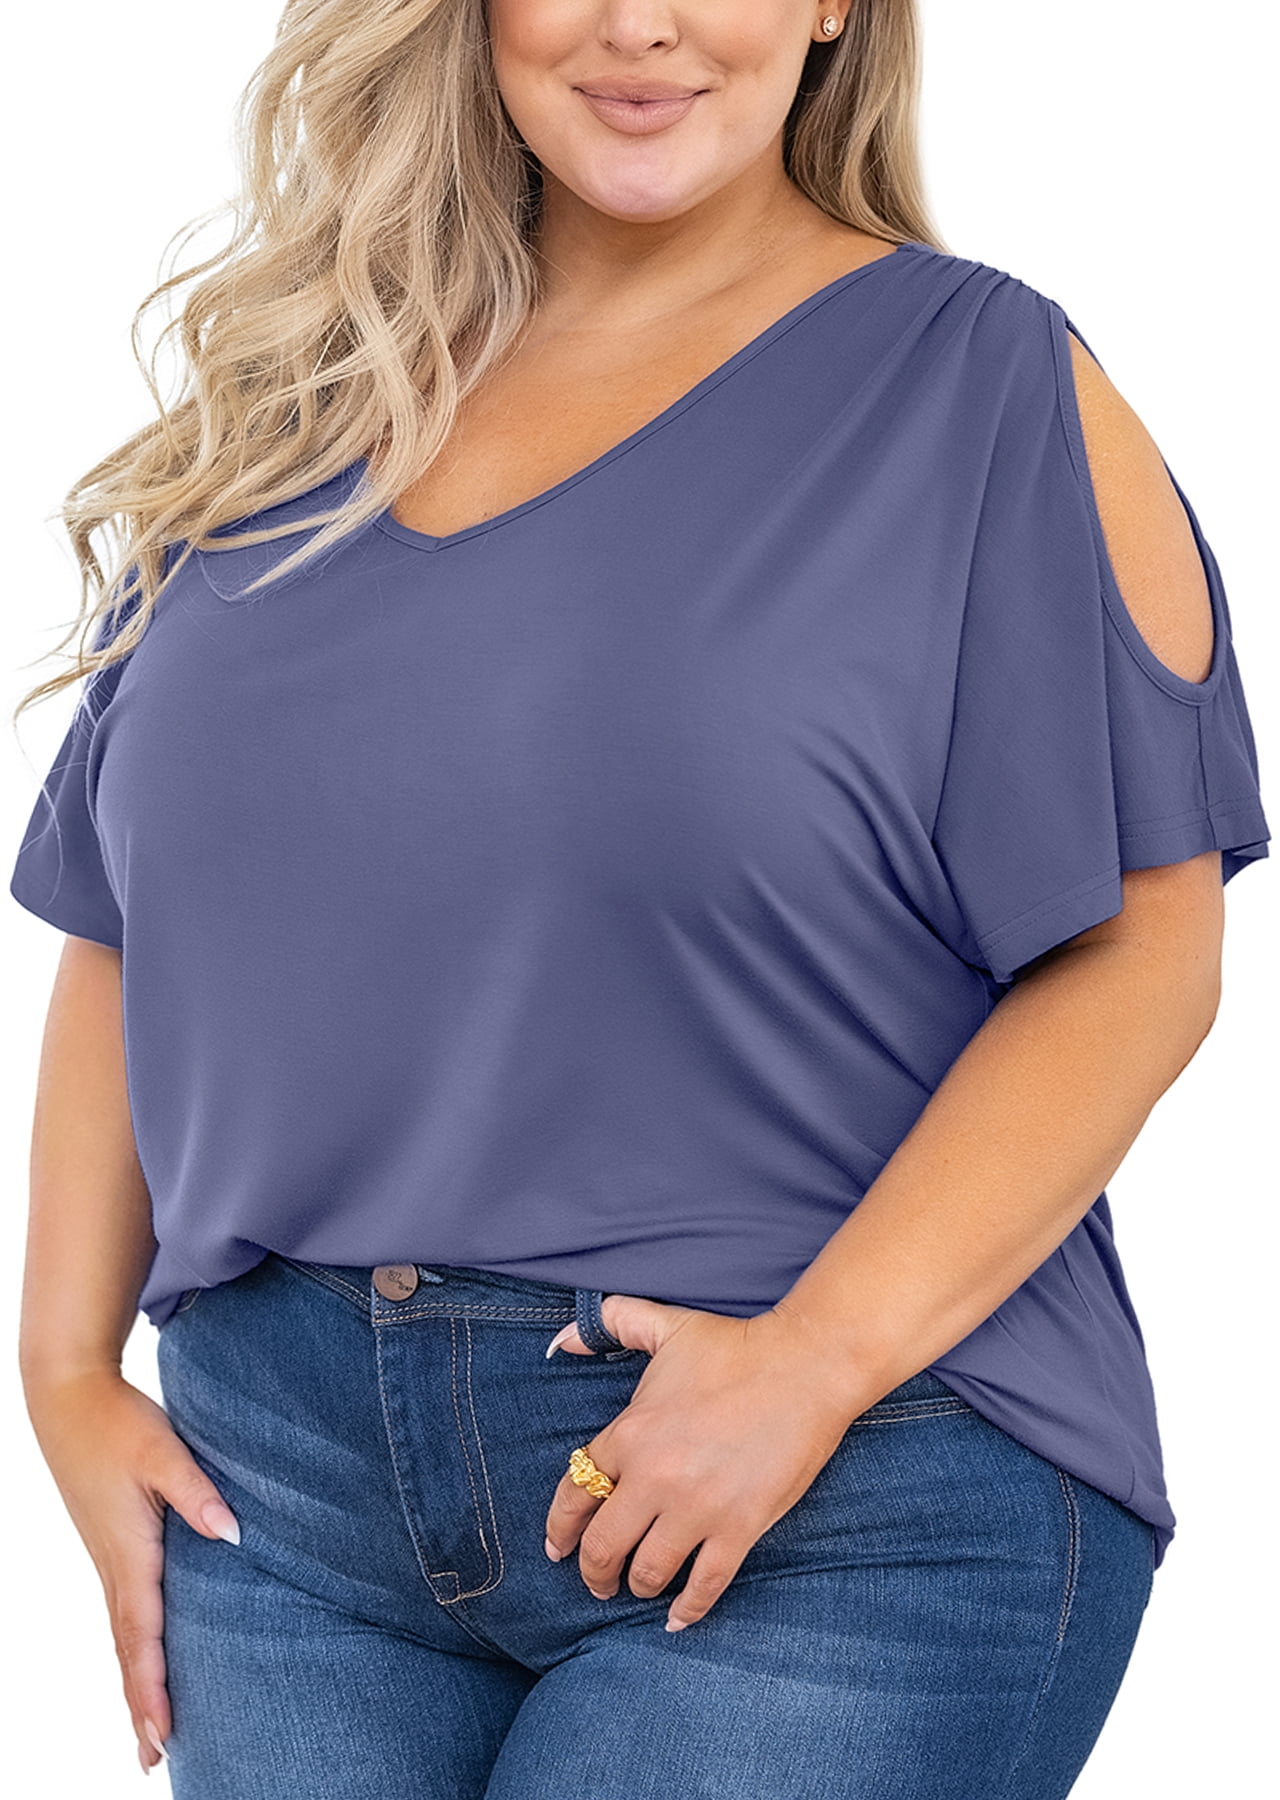 SHOWMALL Plus Size Tops for Women Cold Shoulder Clothes Gray Blue 2X Blouse  Short Sleeve Clothing V Neck Tunic Summer Shirts